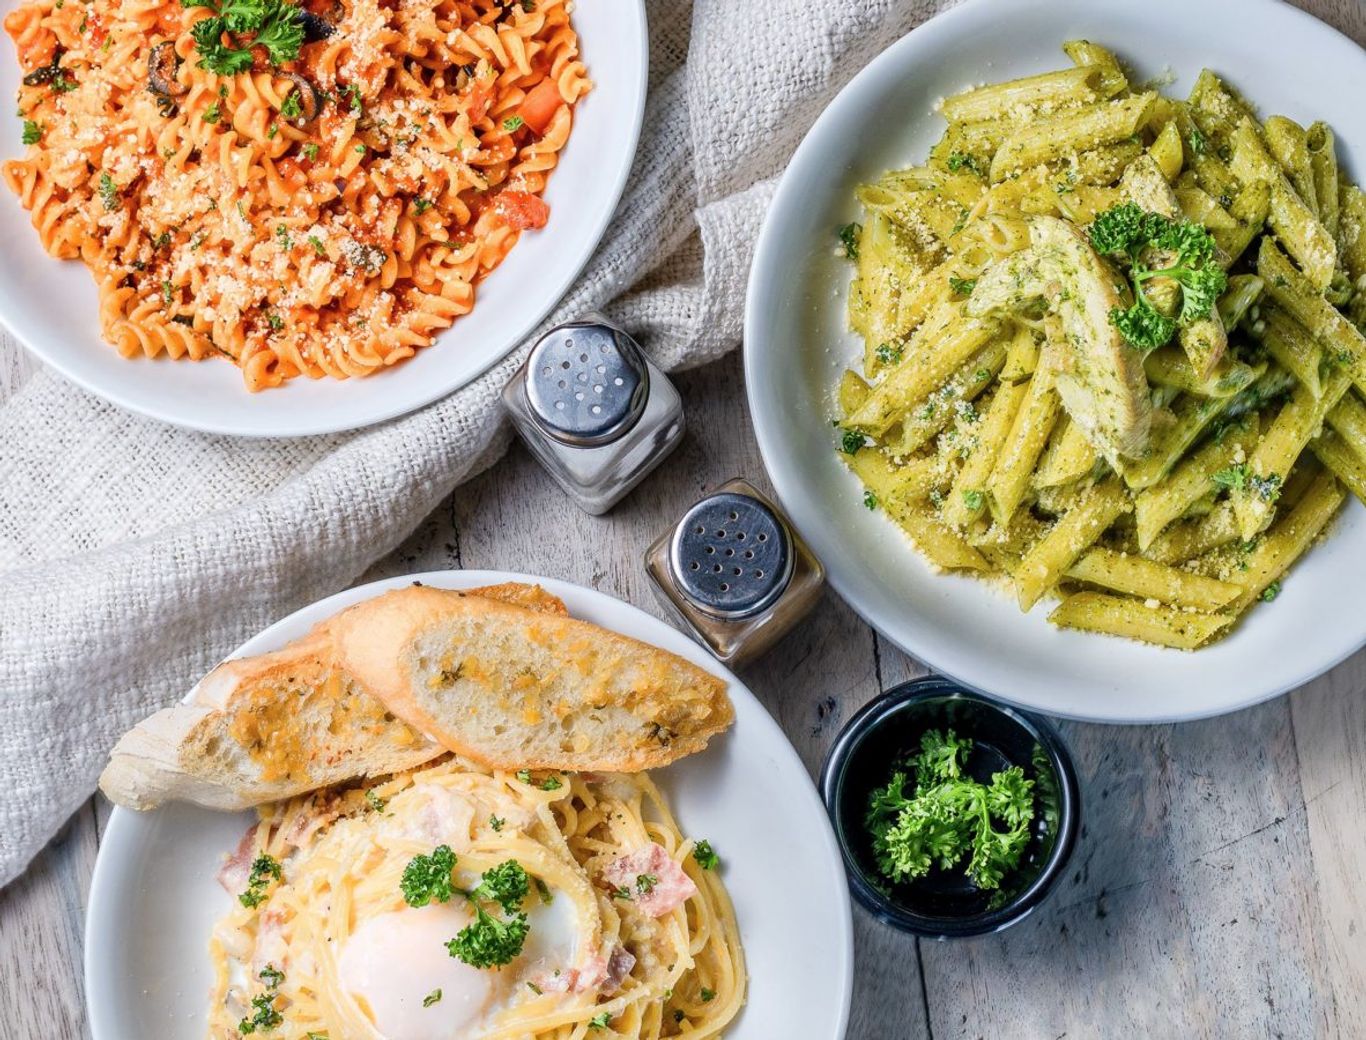 These are the most viral food trends of 2021 on Instagram and TikTok